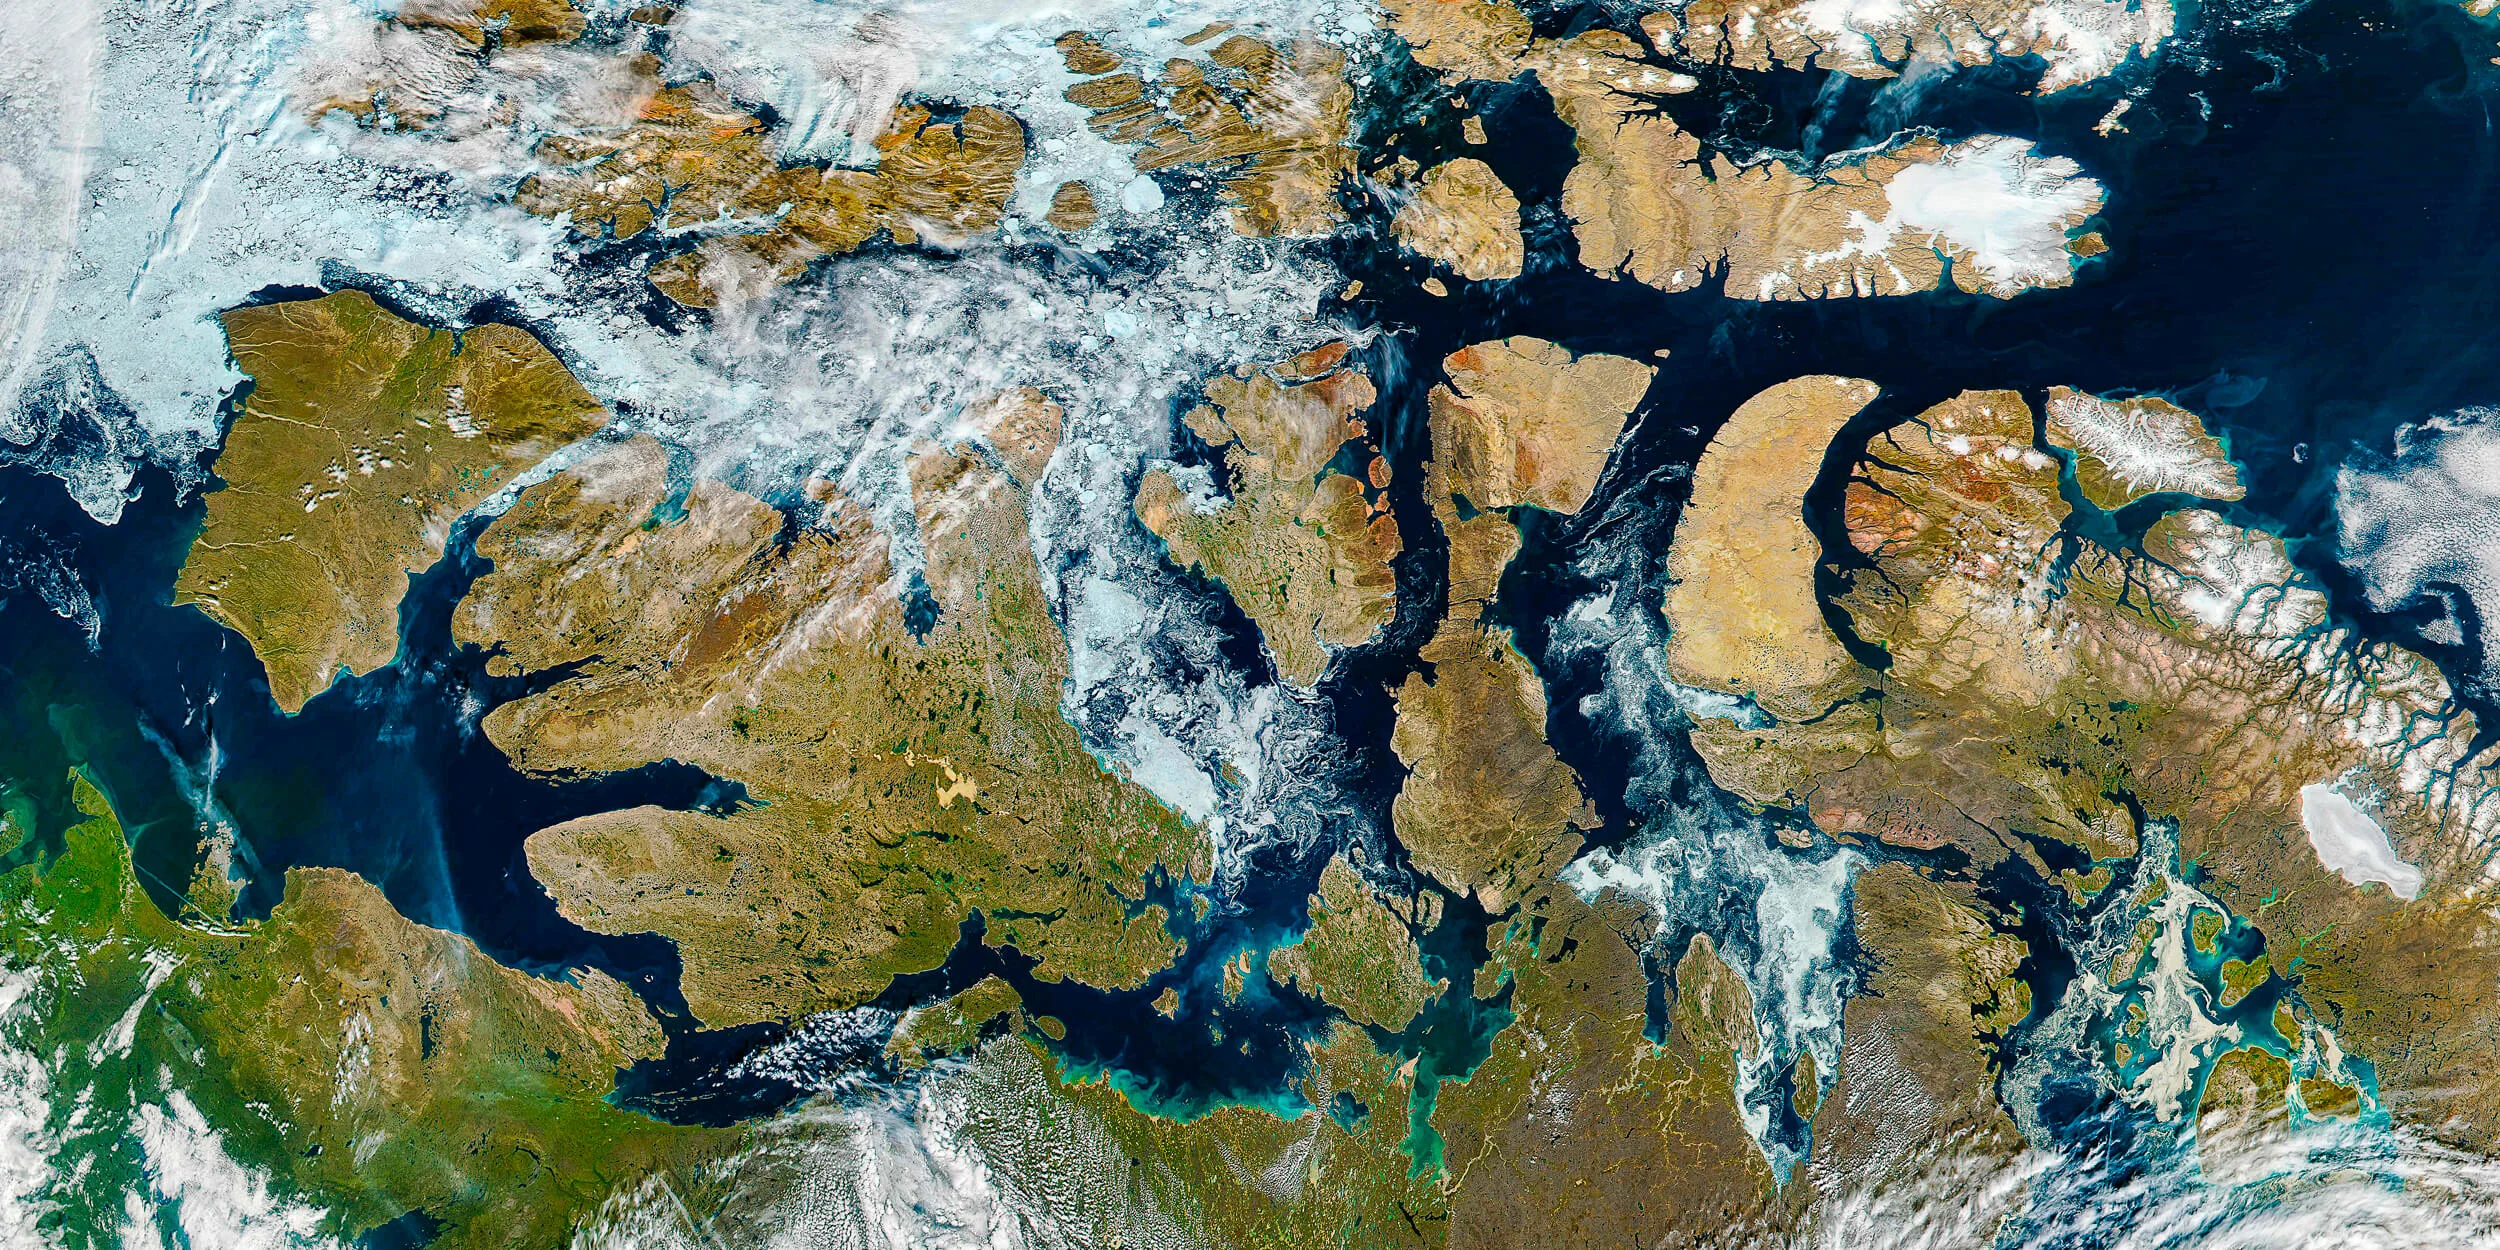 Overview of the Northwest Passage